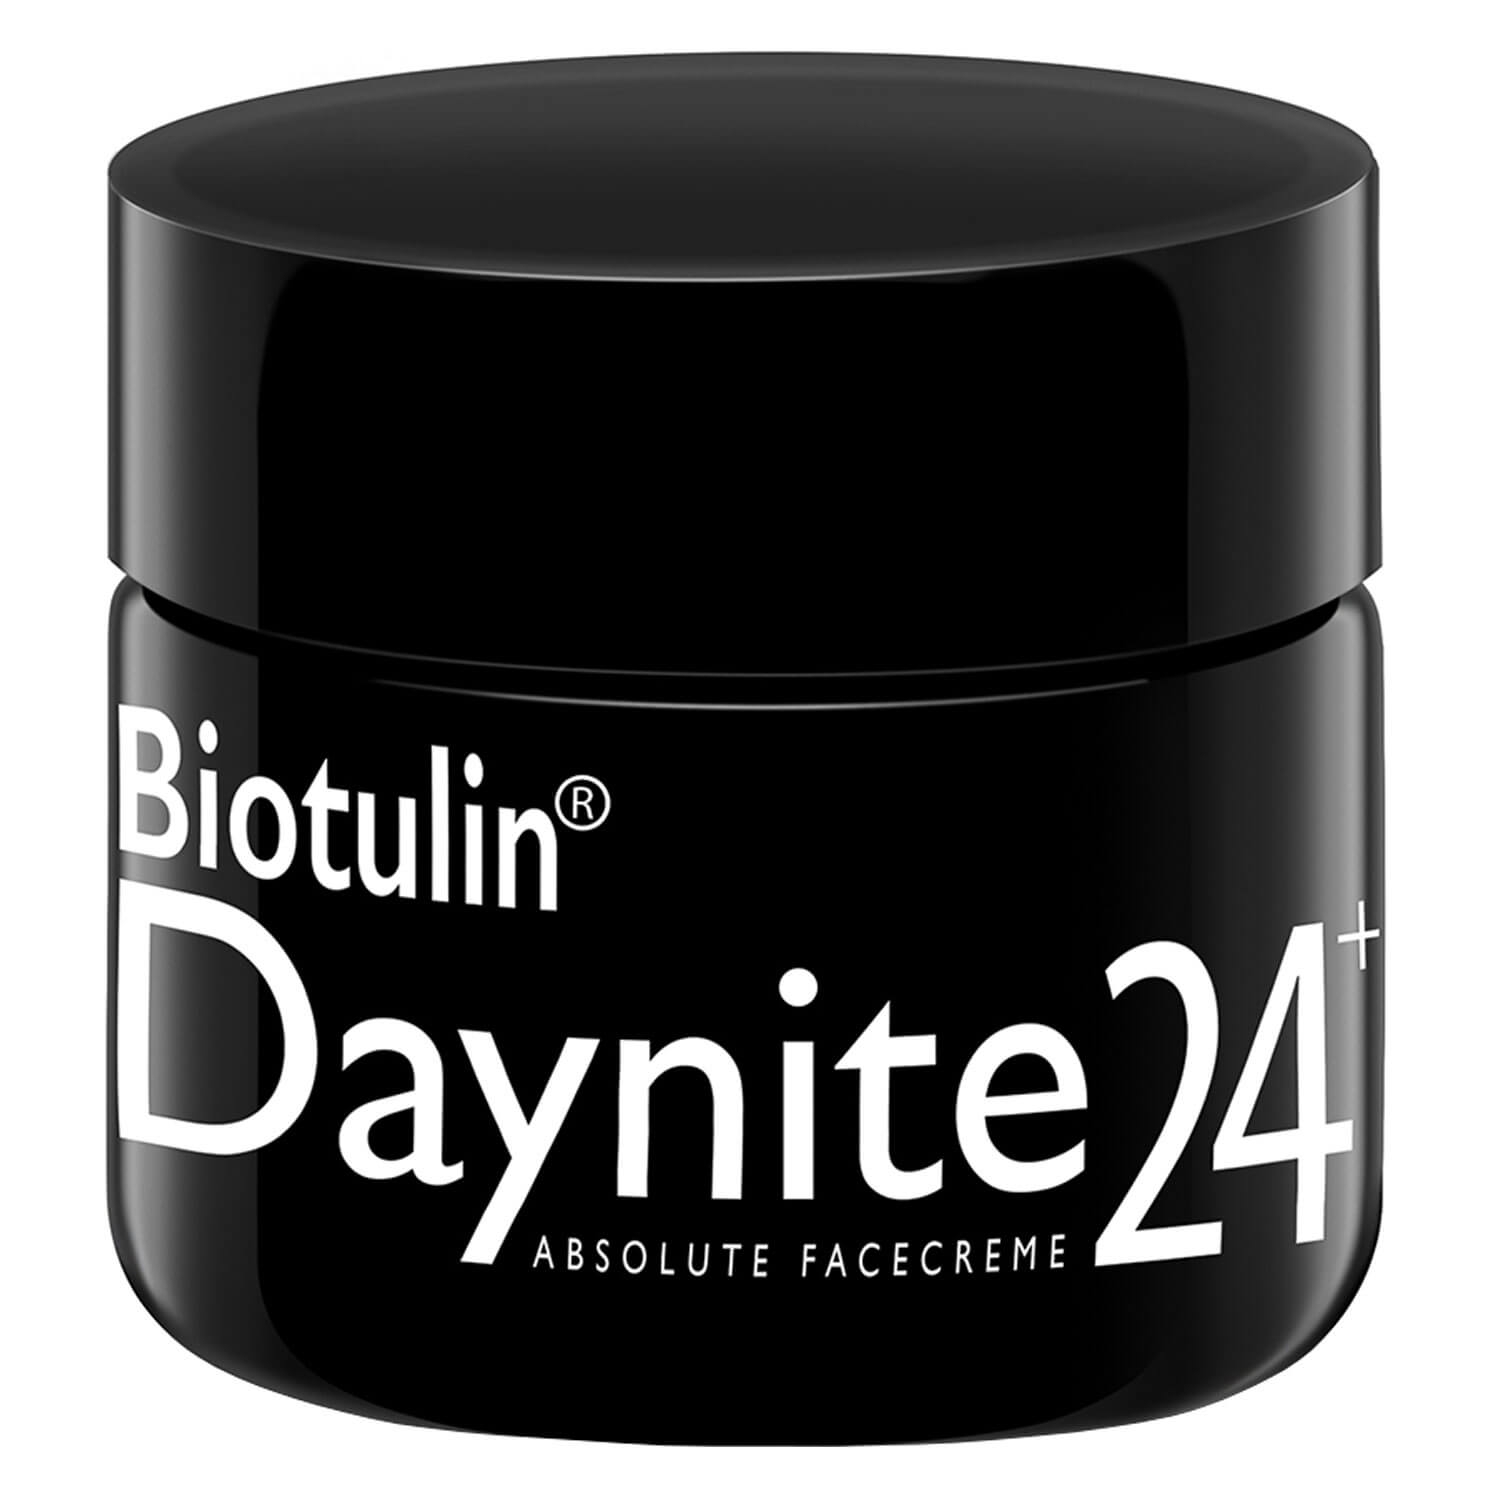 Product image from Biotulin - Daynite24+